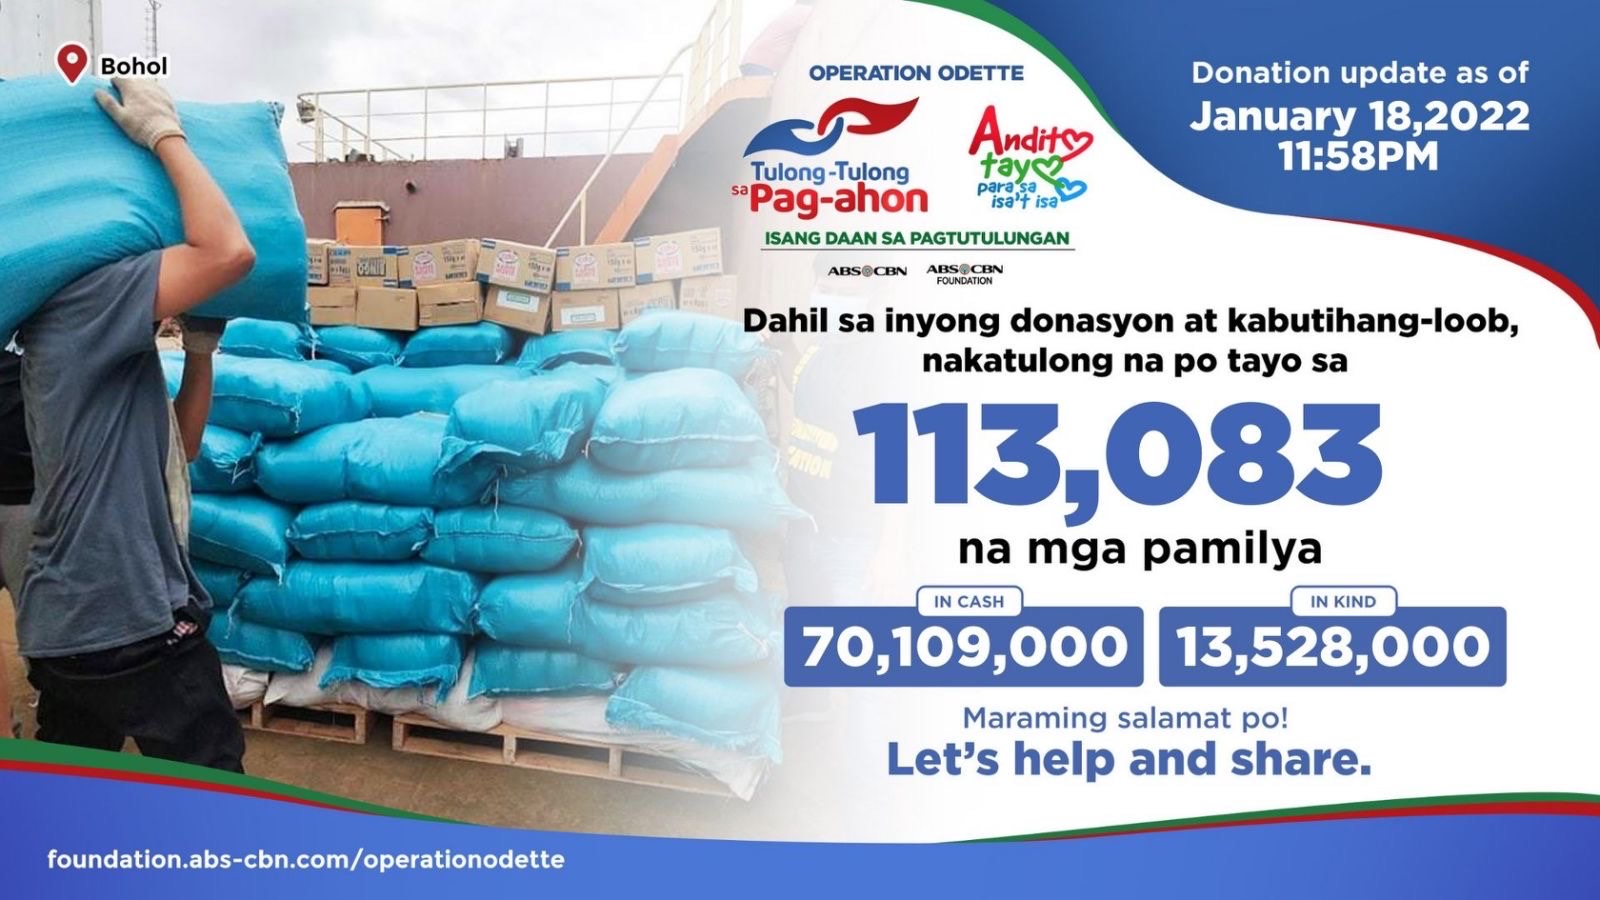 Over 113,000 families affected by Odette were served already by ABS CBN Foundation